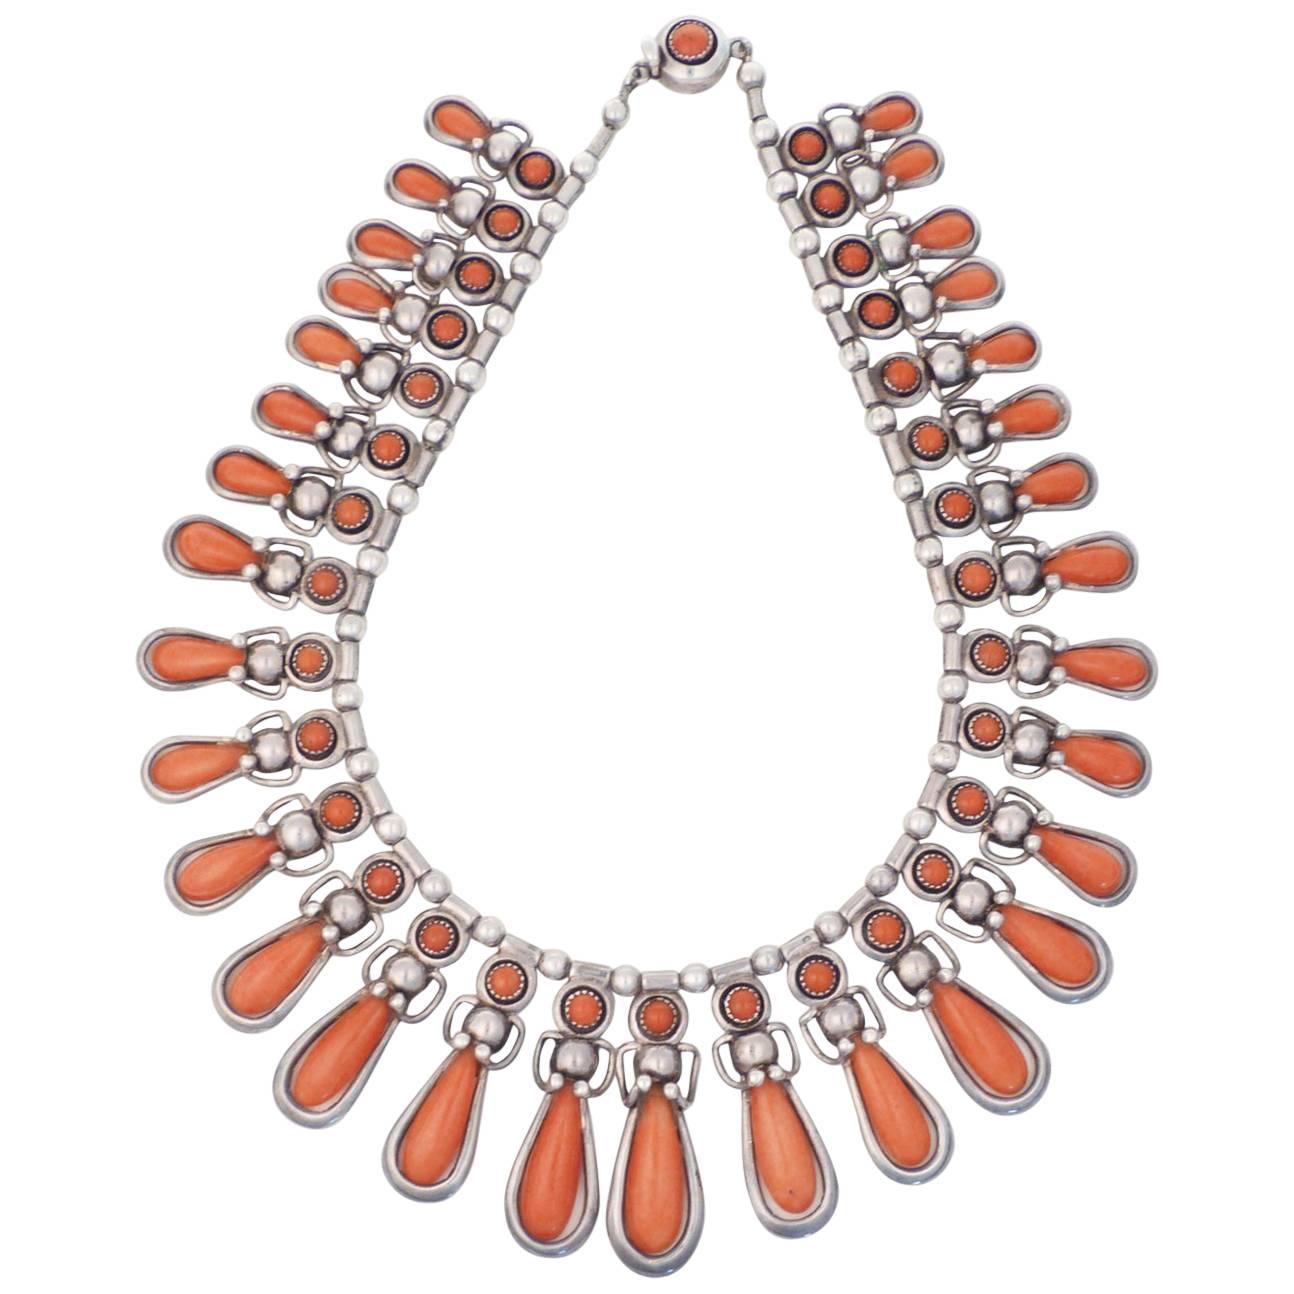 Coral and Silver Necklace by Frank Patania Sr., circa 1960